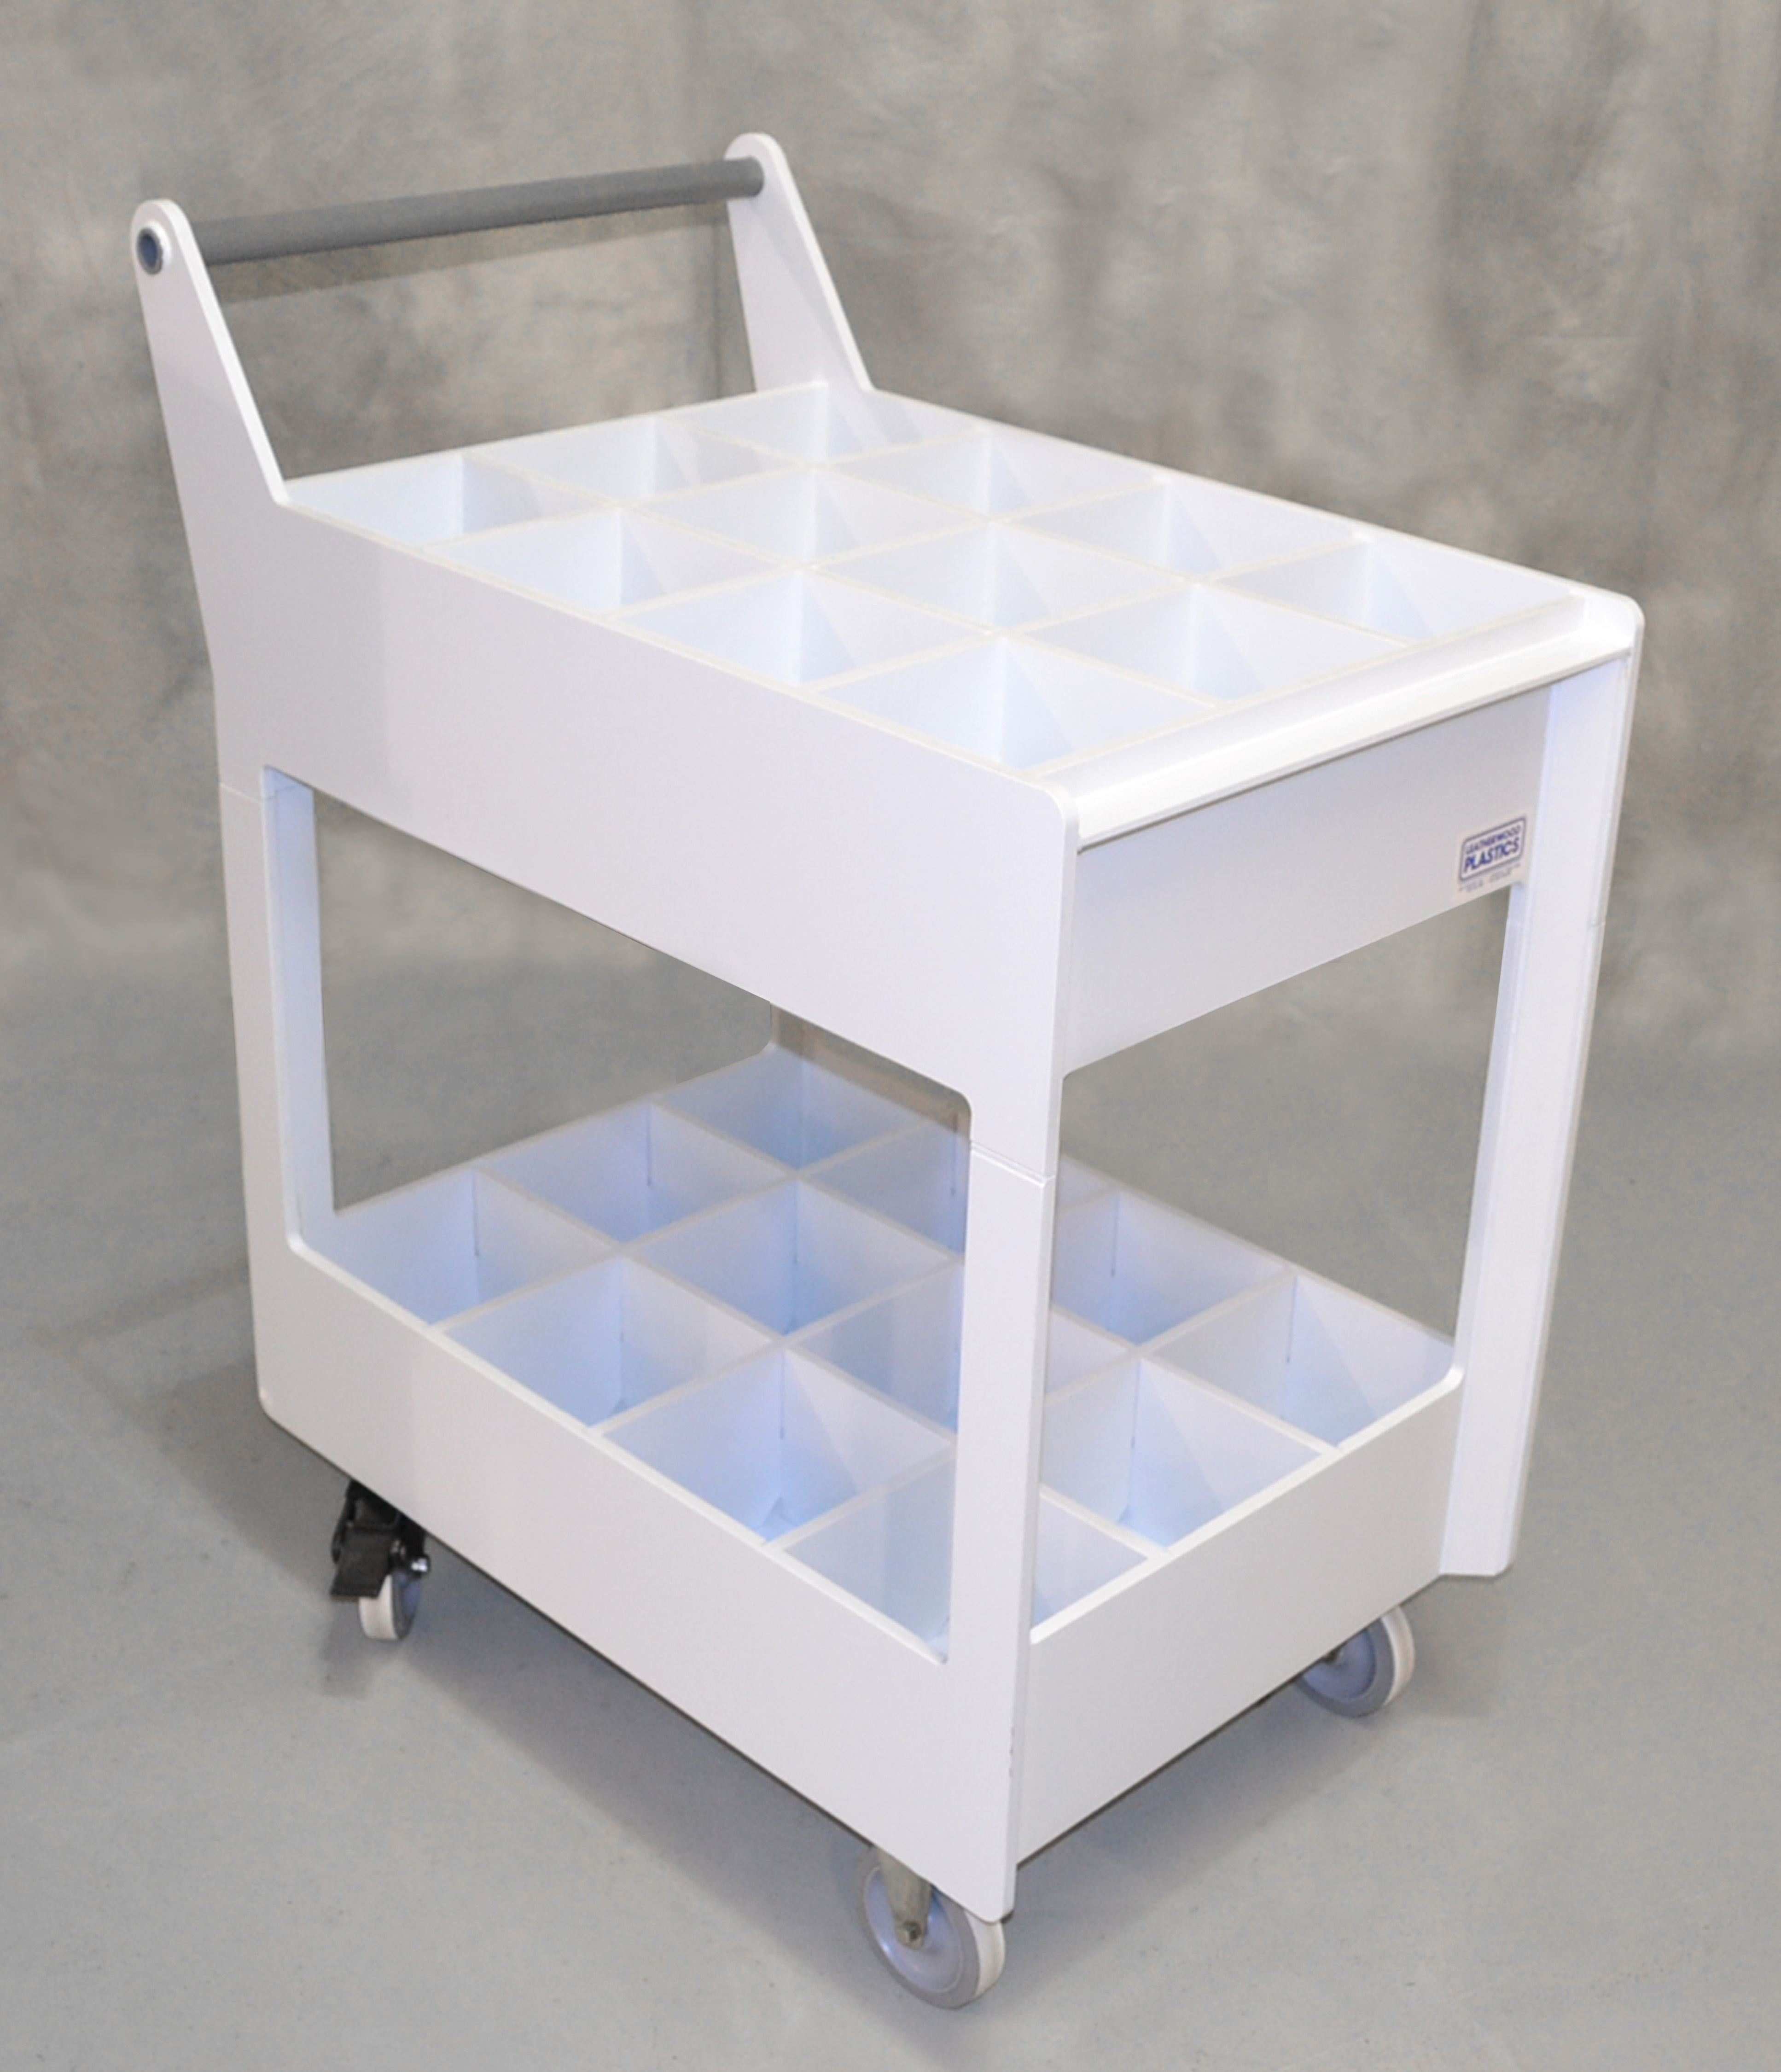 A Chemical Bottle Cart made with Flametec has space for 24 one-gallon bottles.